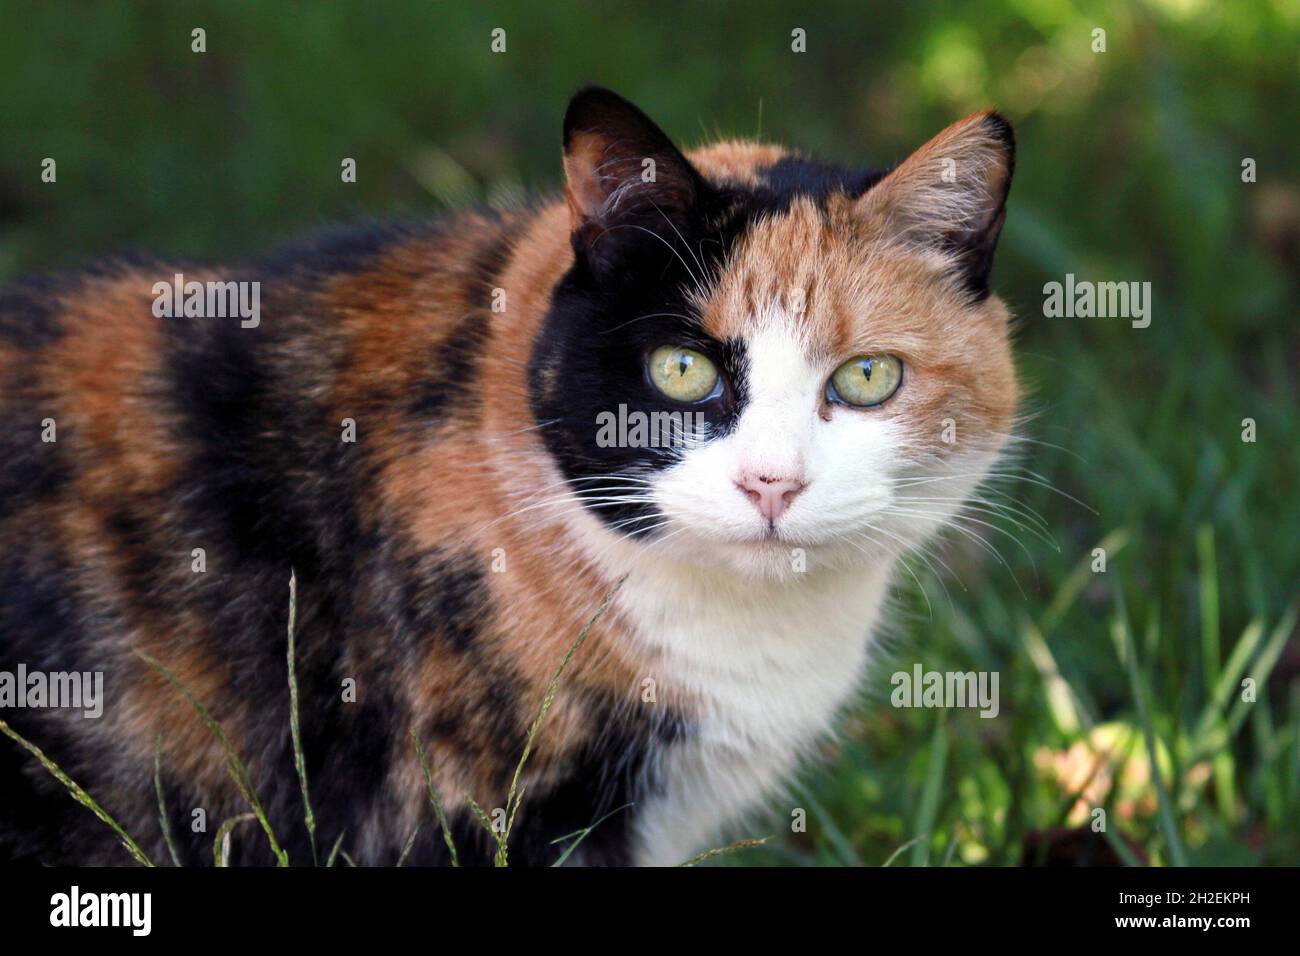 A beautiful, old and weathered calico cat with intense green eyes staring right at you Stock Photo